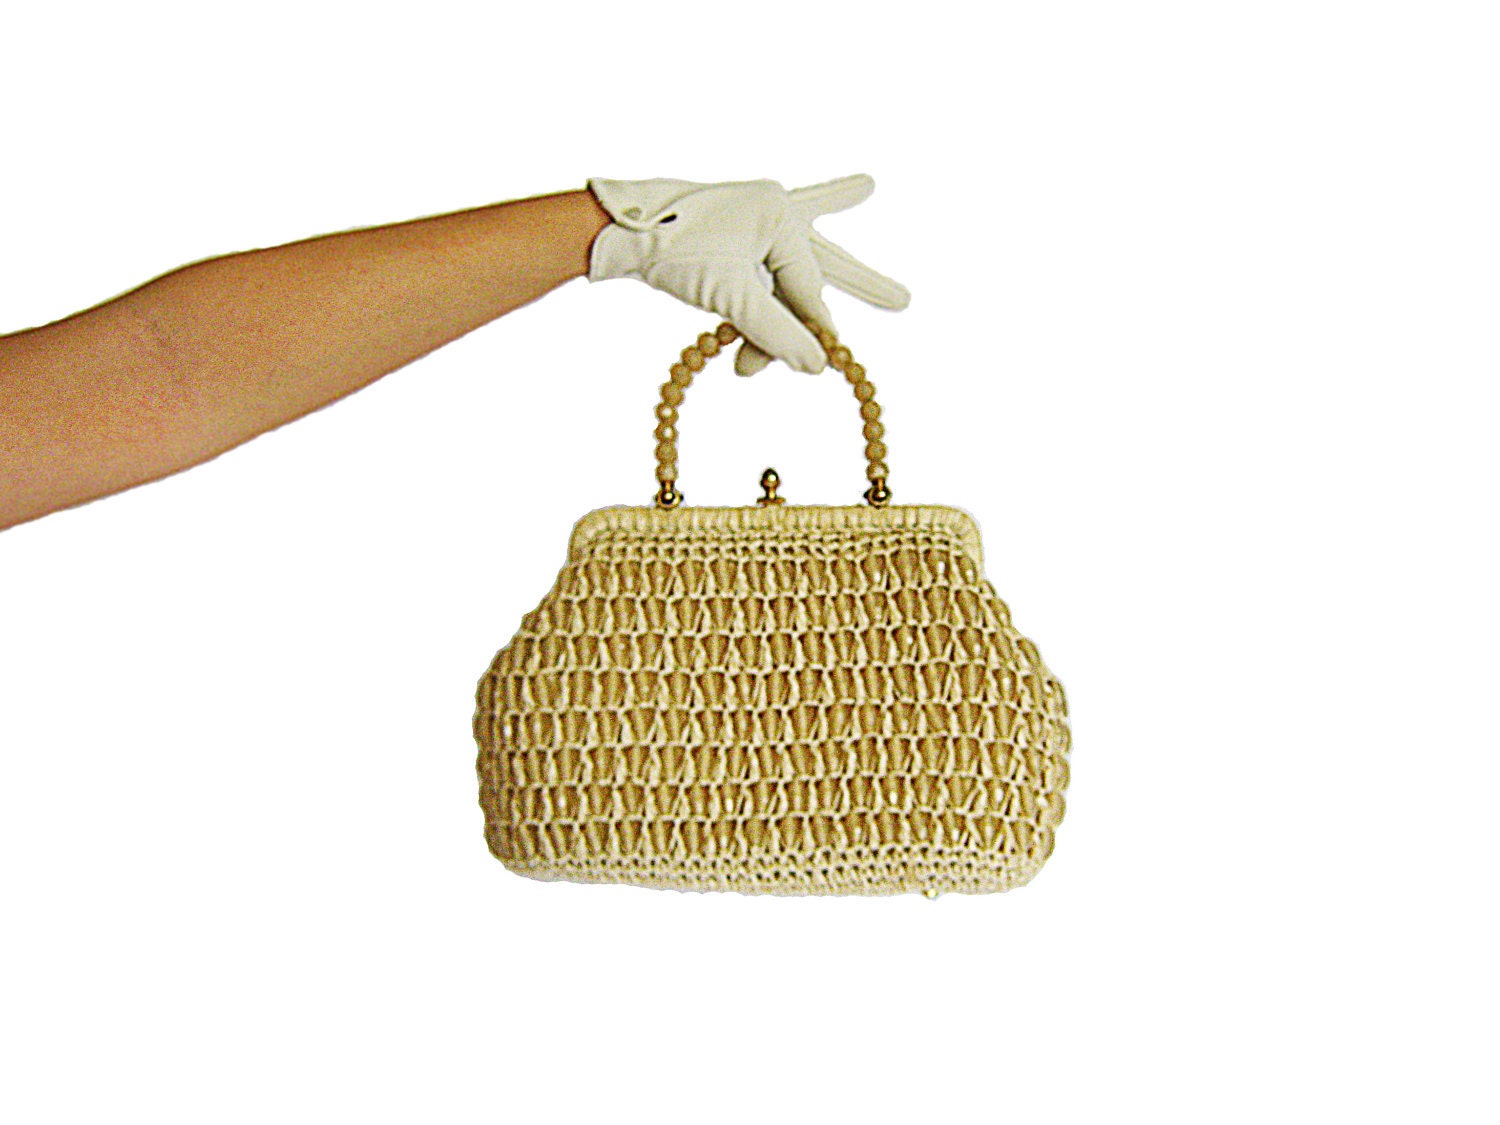 1960s Beaded Handbag / Made In Italy / Cream / Woven / Faceted Beads - CoyoteMarmalade